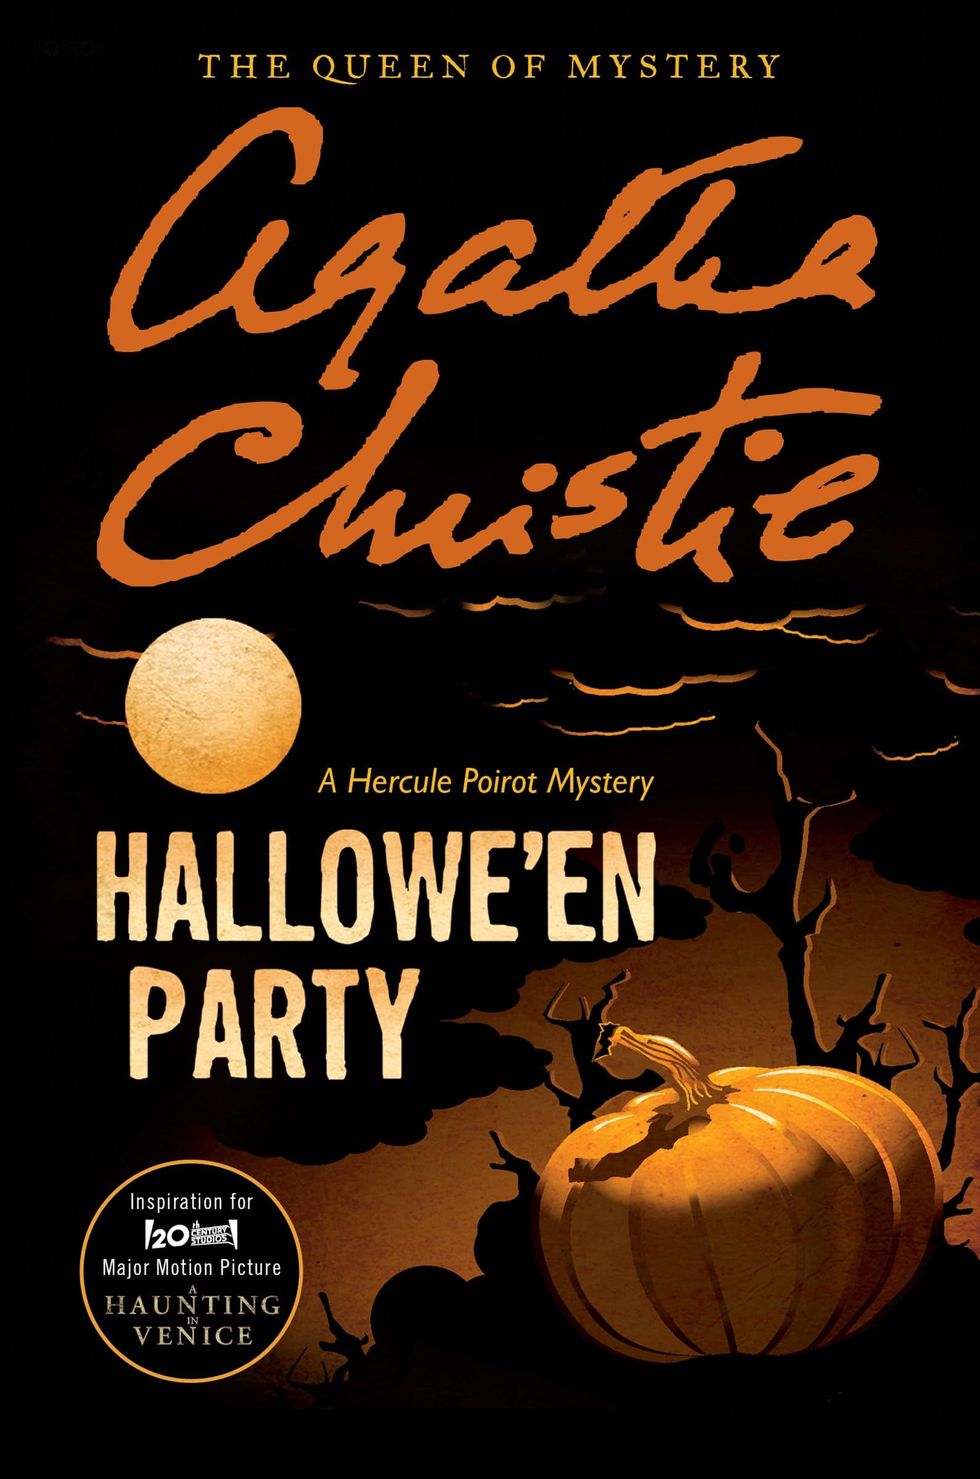 men`s health Hallowe'en Party: Inspiration for the 20th Century Studios Major Motion Picture A Haunting in Venice (Hercule Poirot Mysteries, 36)